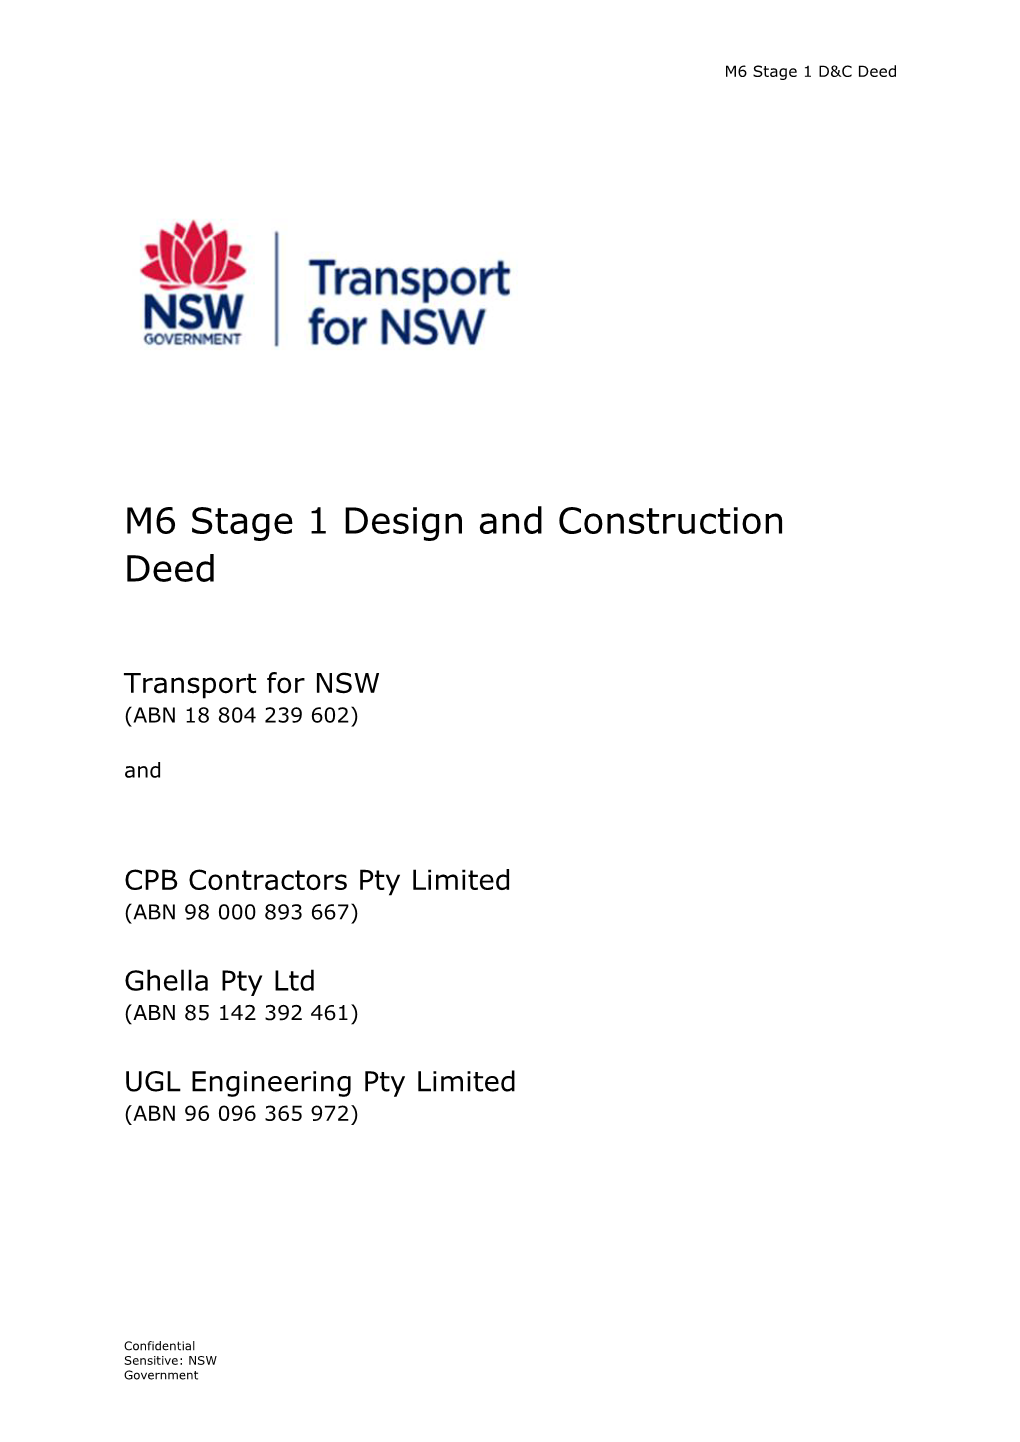 M6 Stage 1 Design and Construction Deed